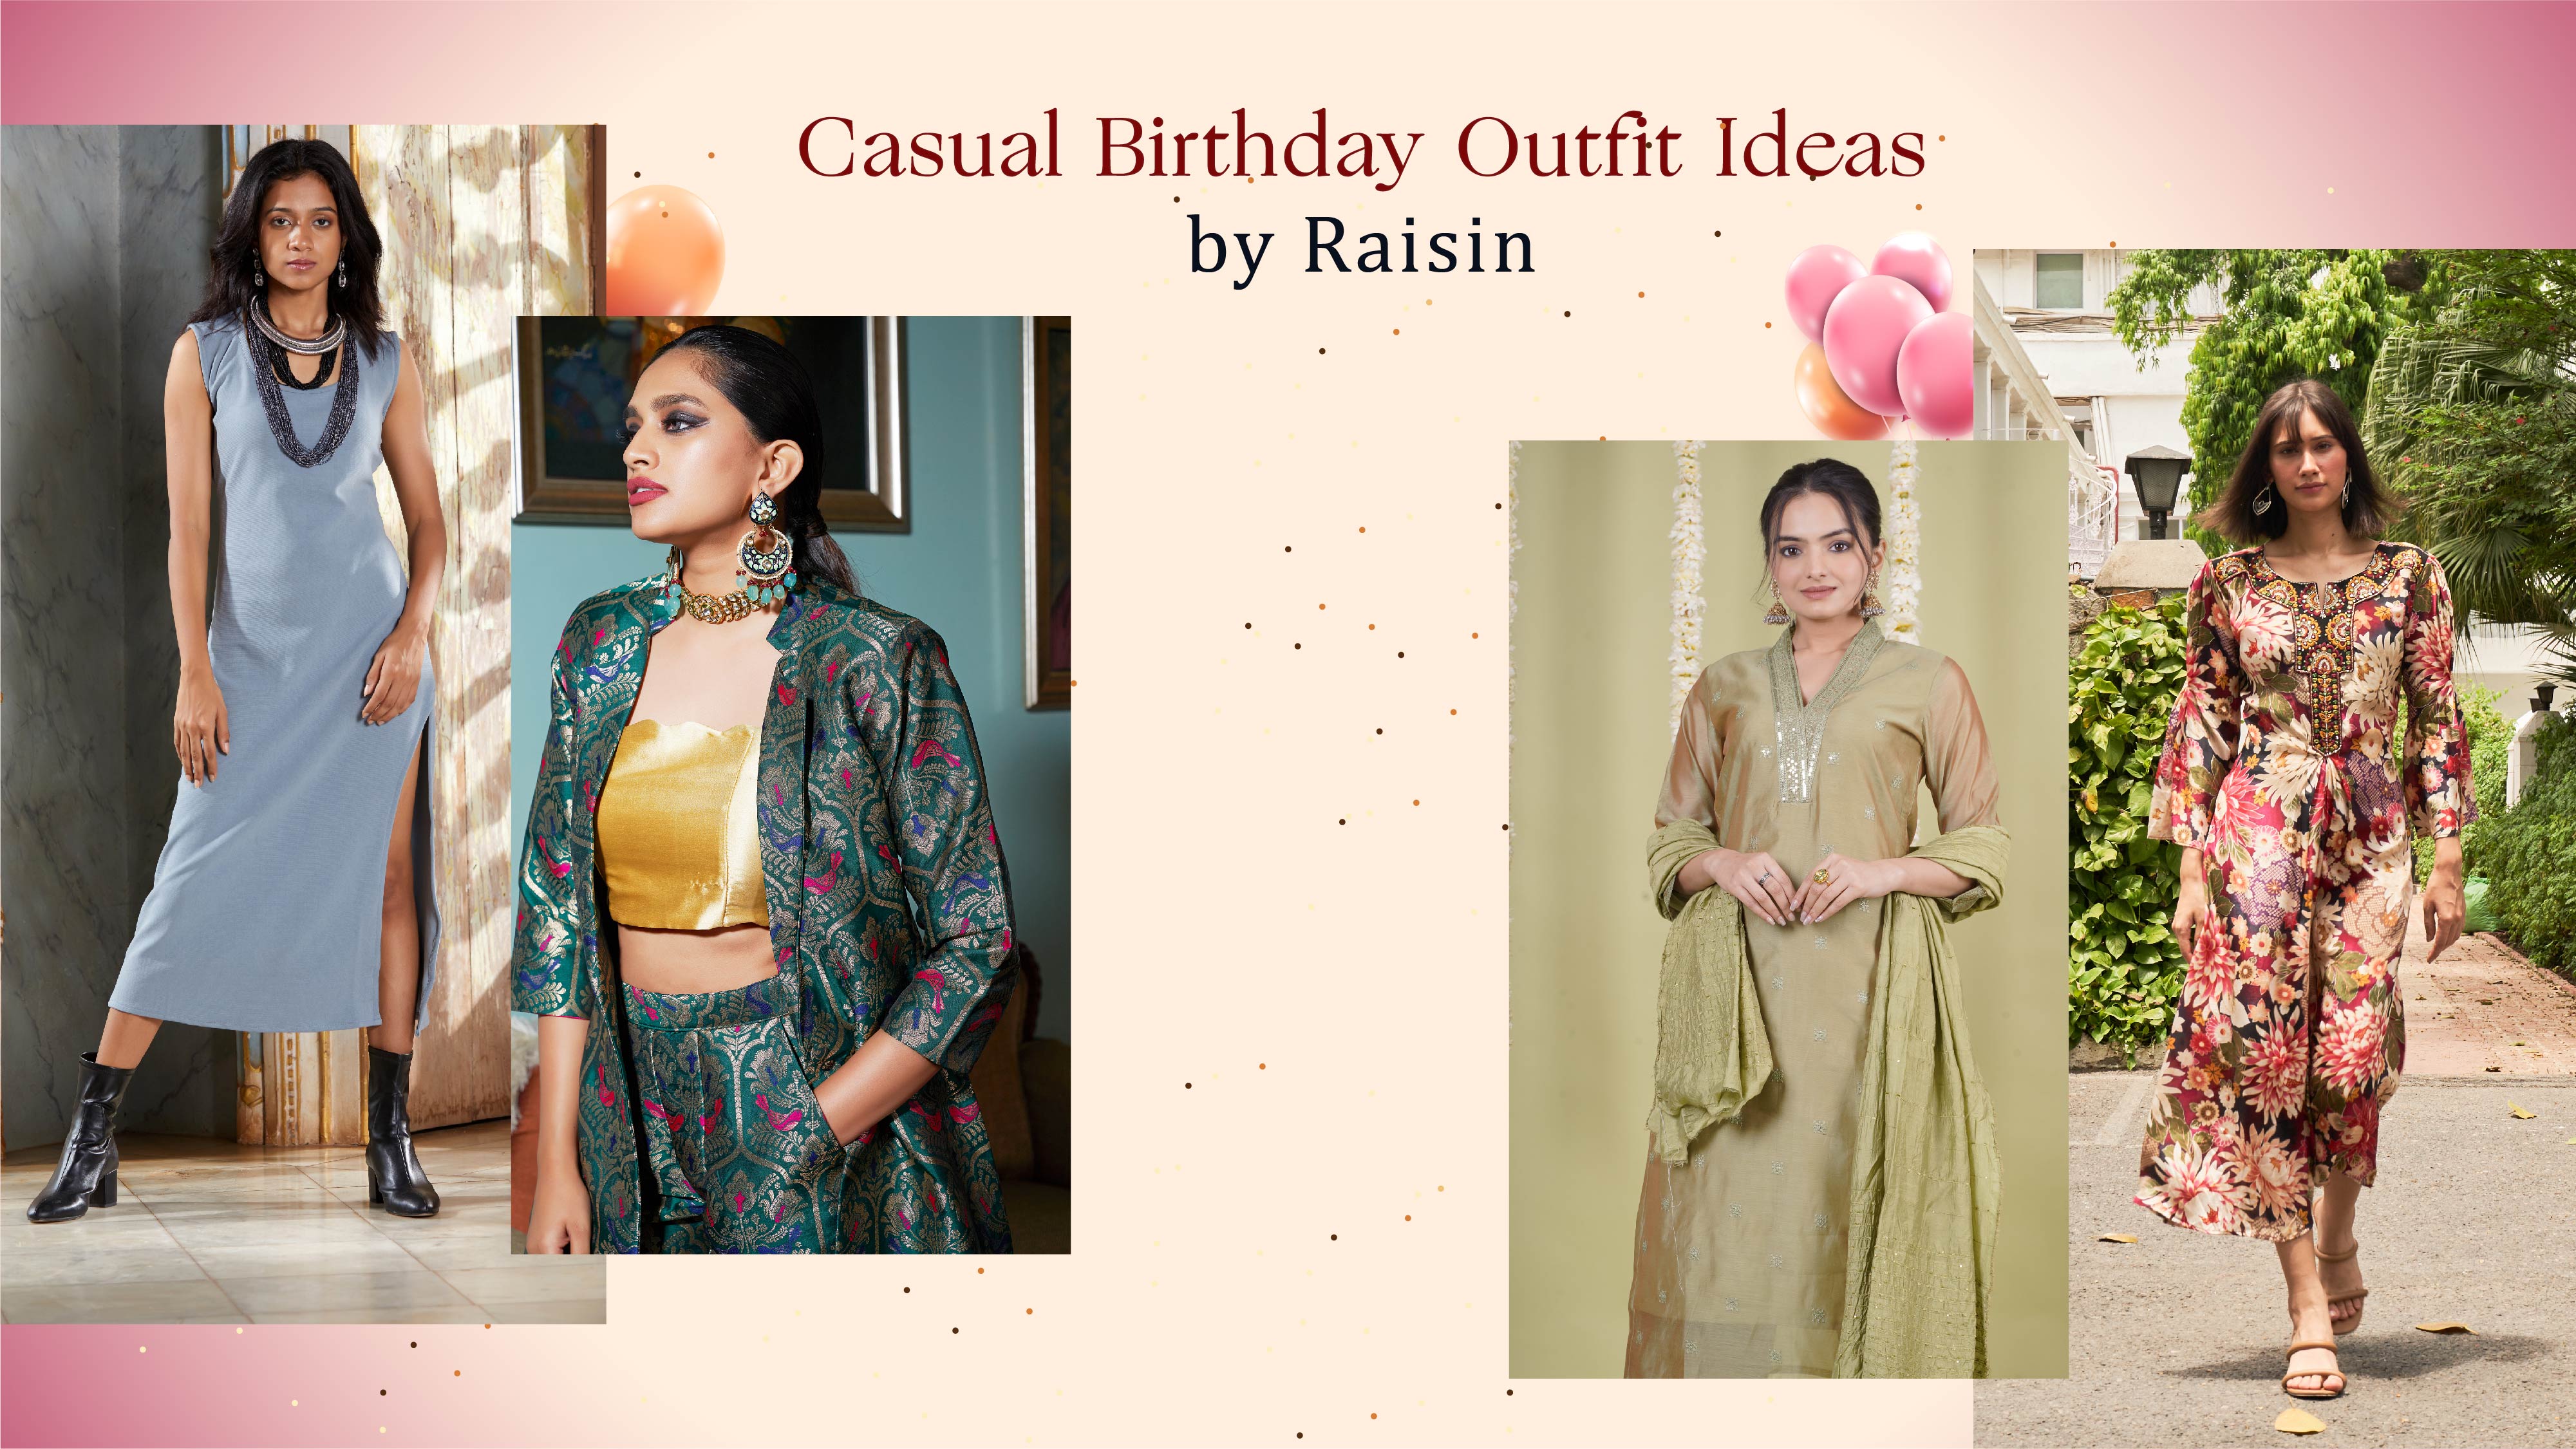 10 Casual Birthday Outfit Ideas to Ace Your Special Day